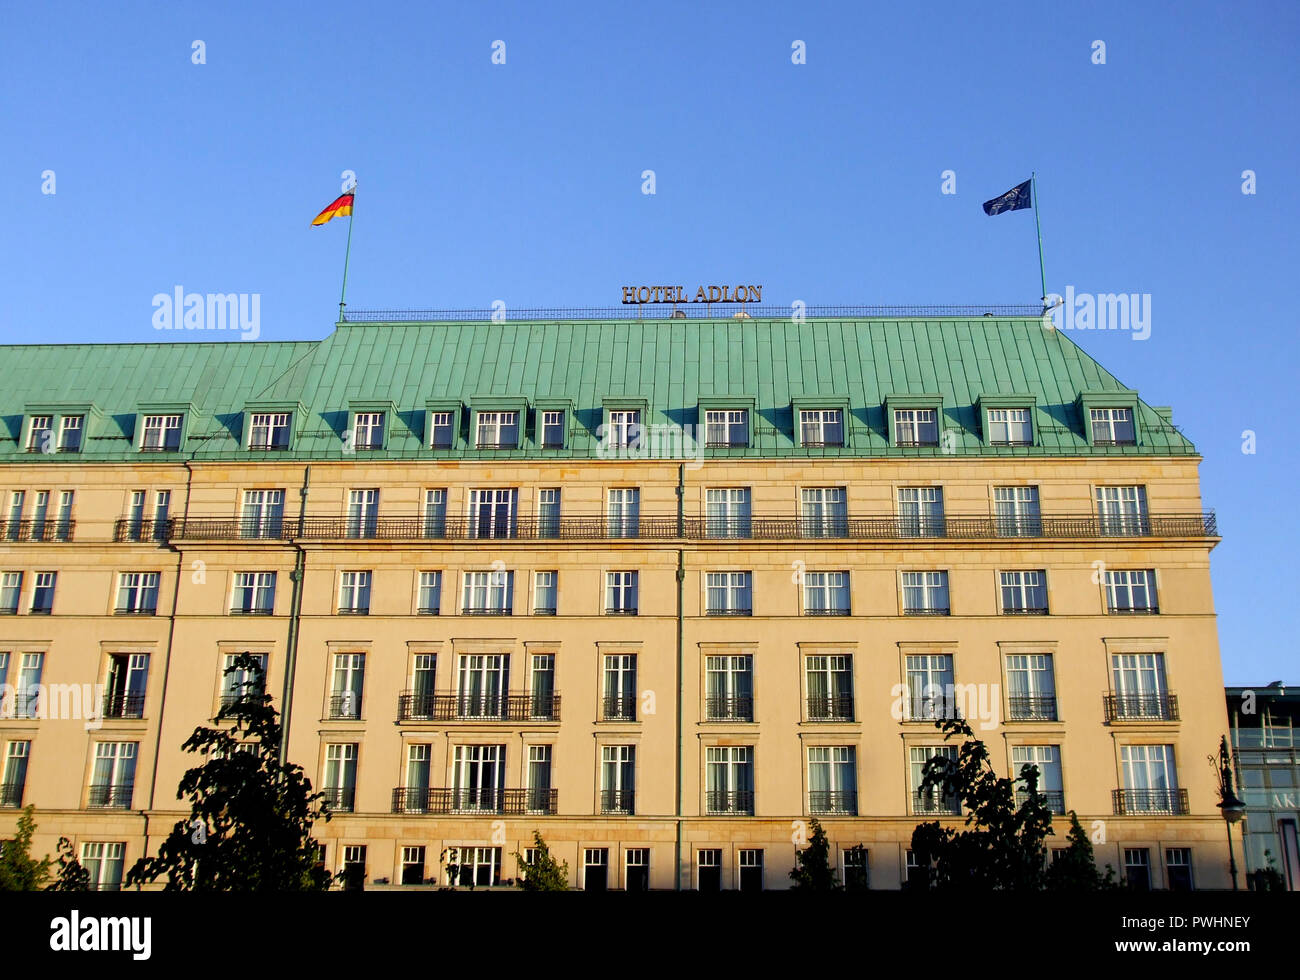 The huge, famous, 5 star Adlon Hotel sits alongside the Brandenburg Gate monument in the German city of Berlin. Stock Photo